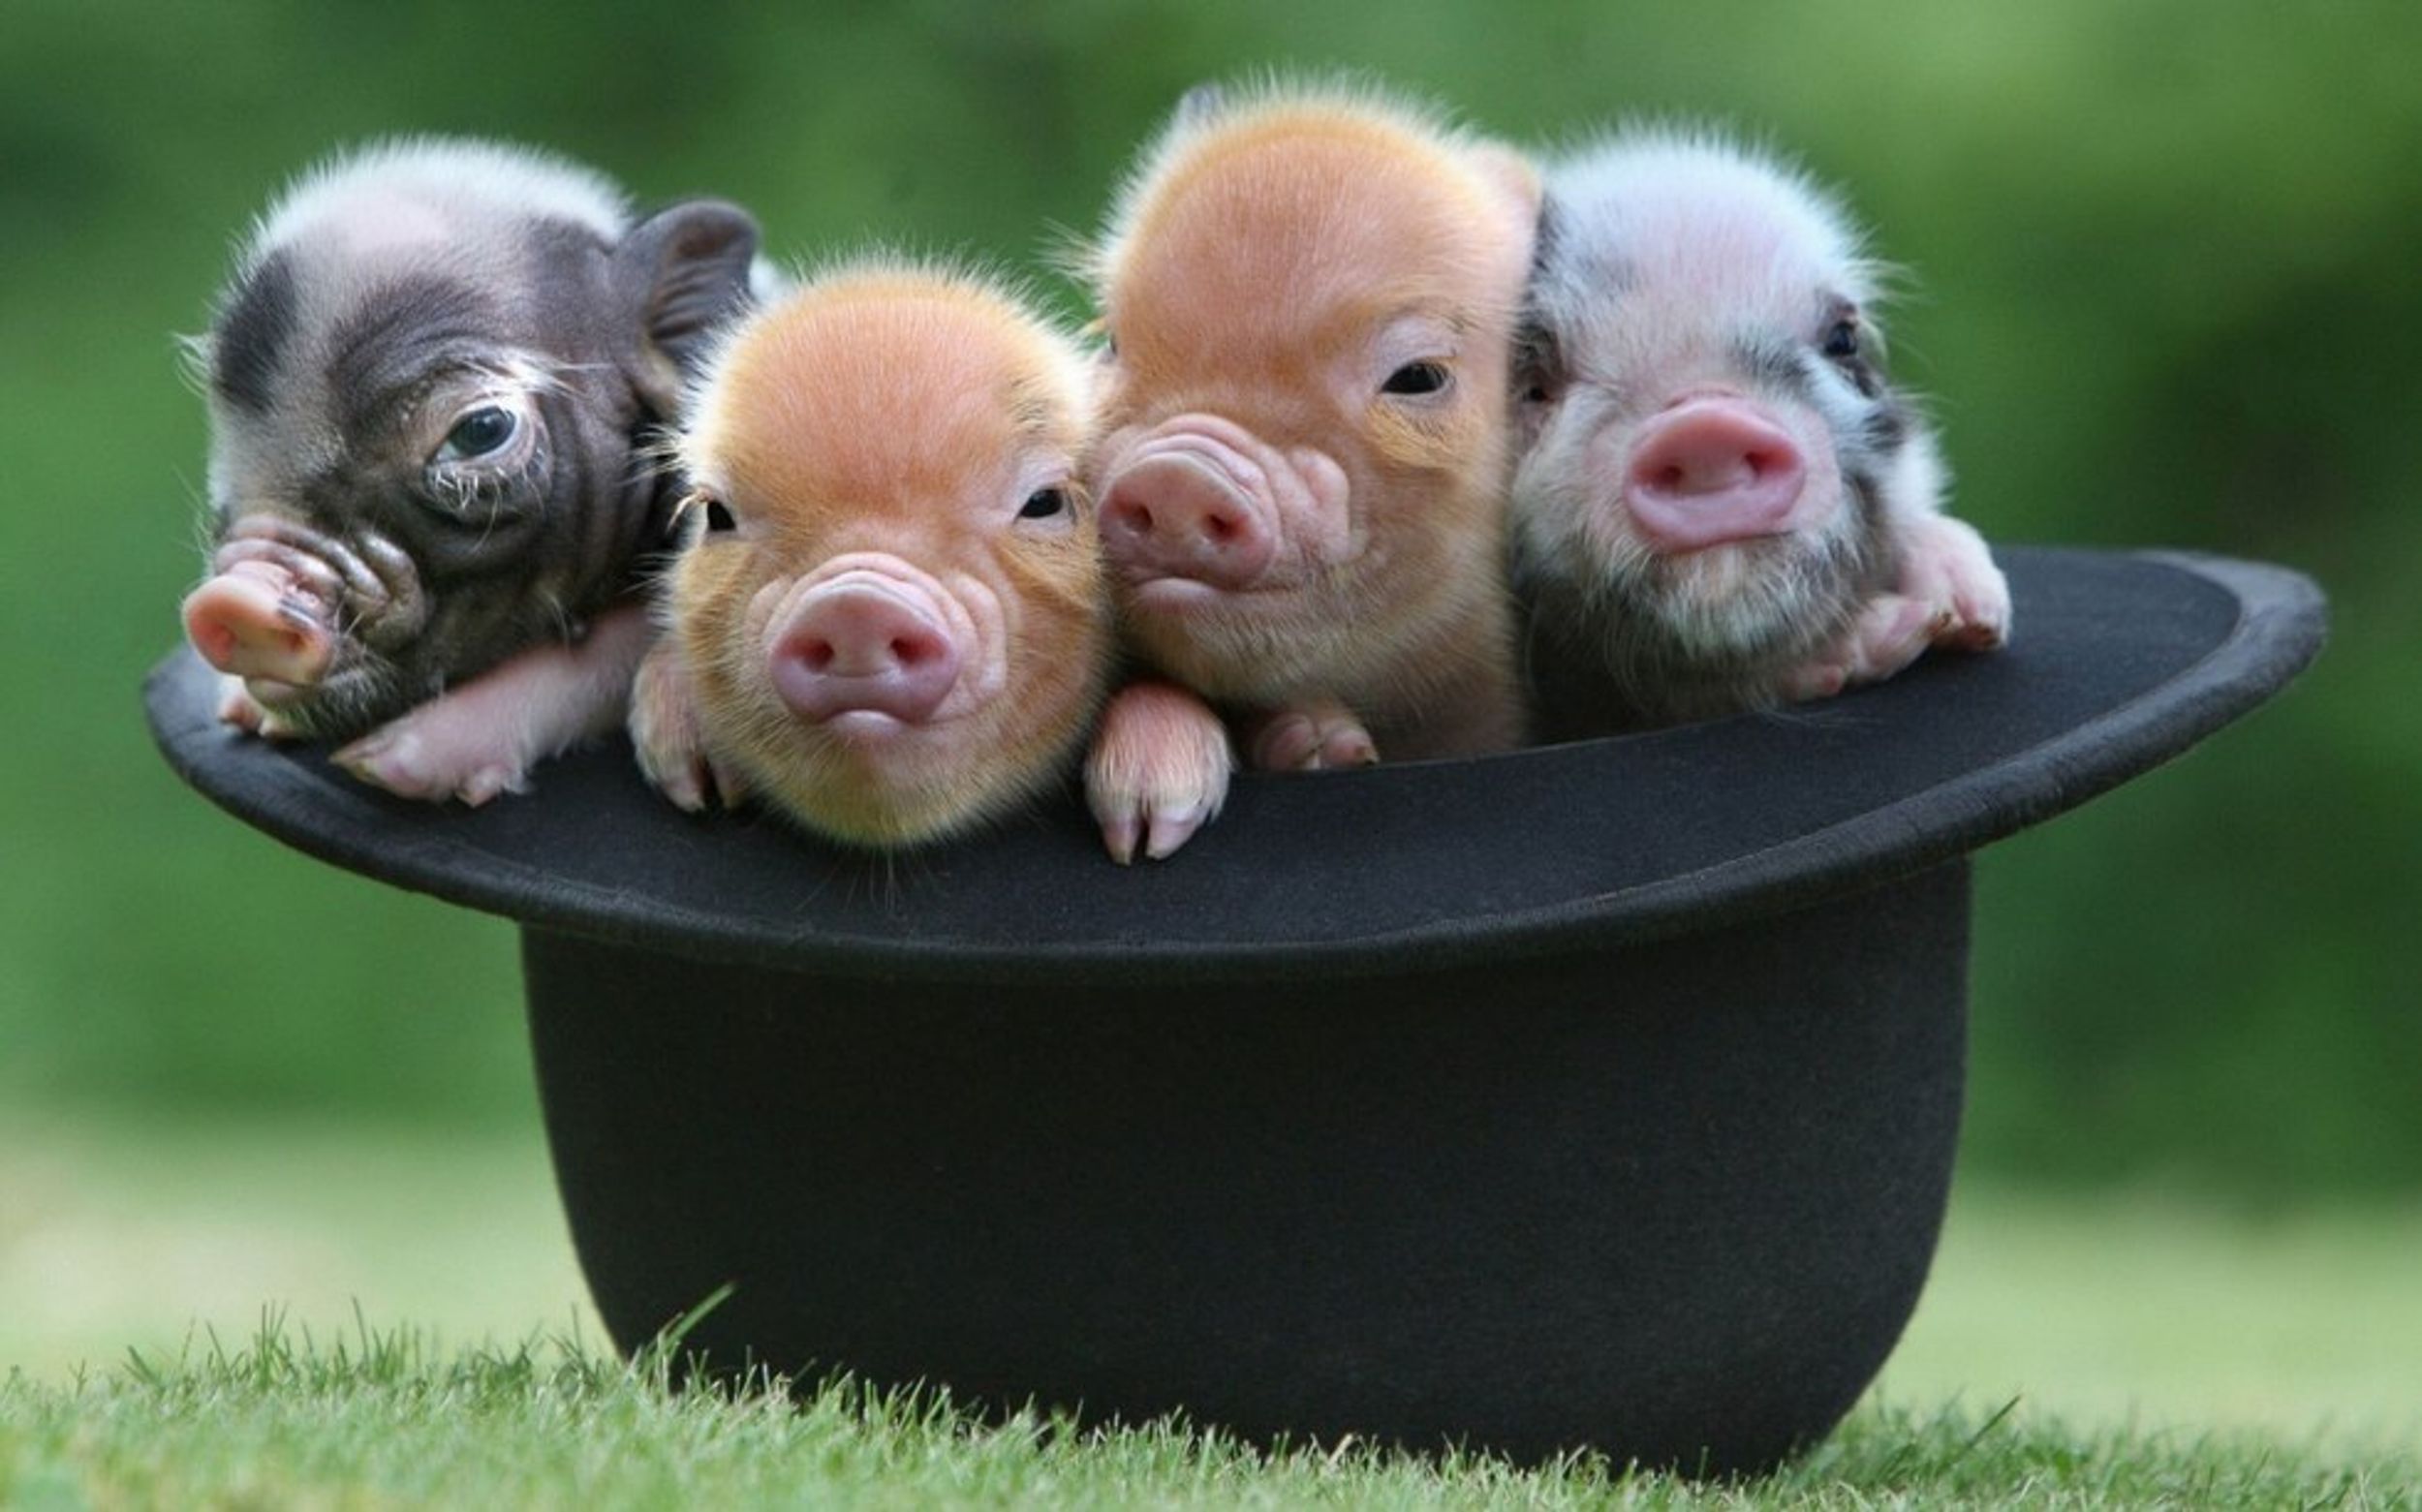 18 Pig GIFs To Brighten Your Day